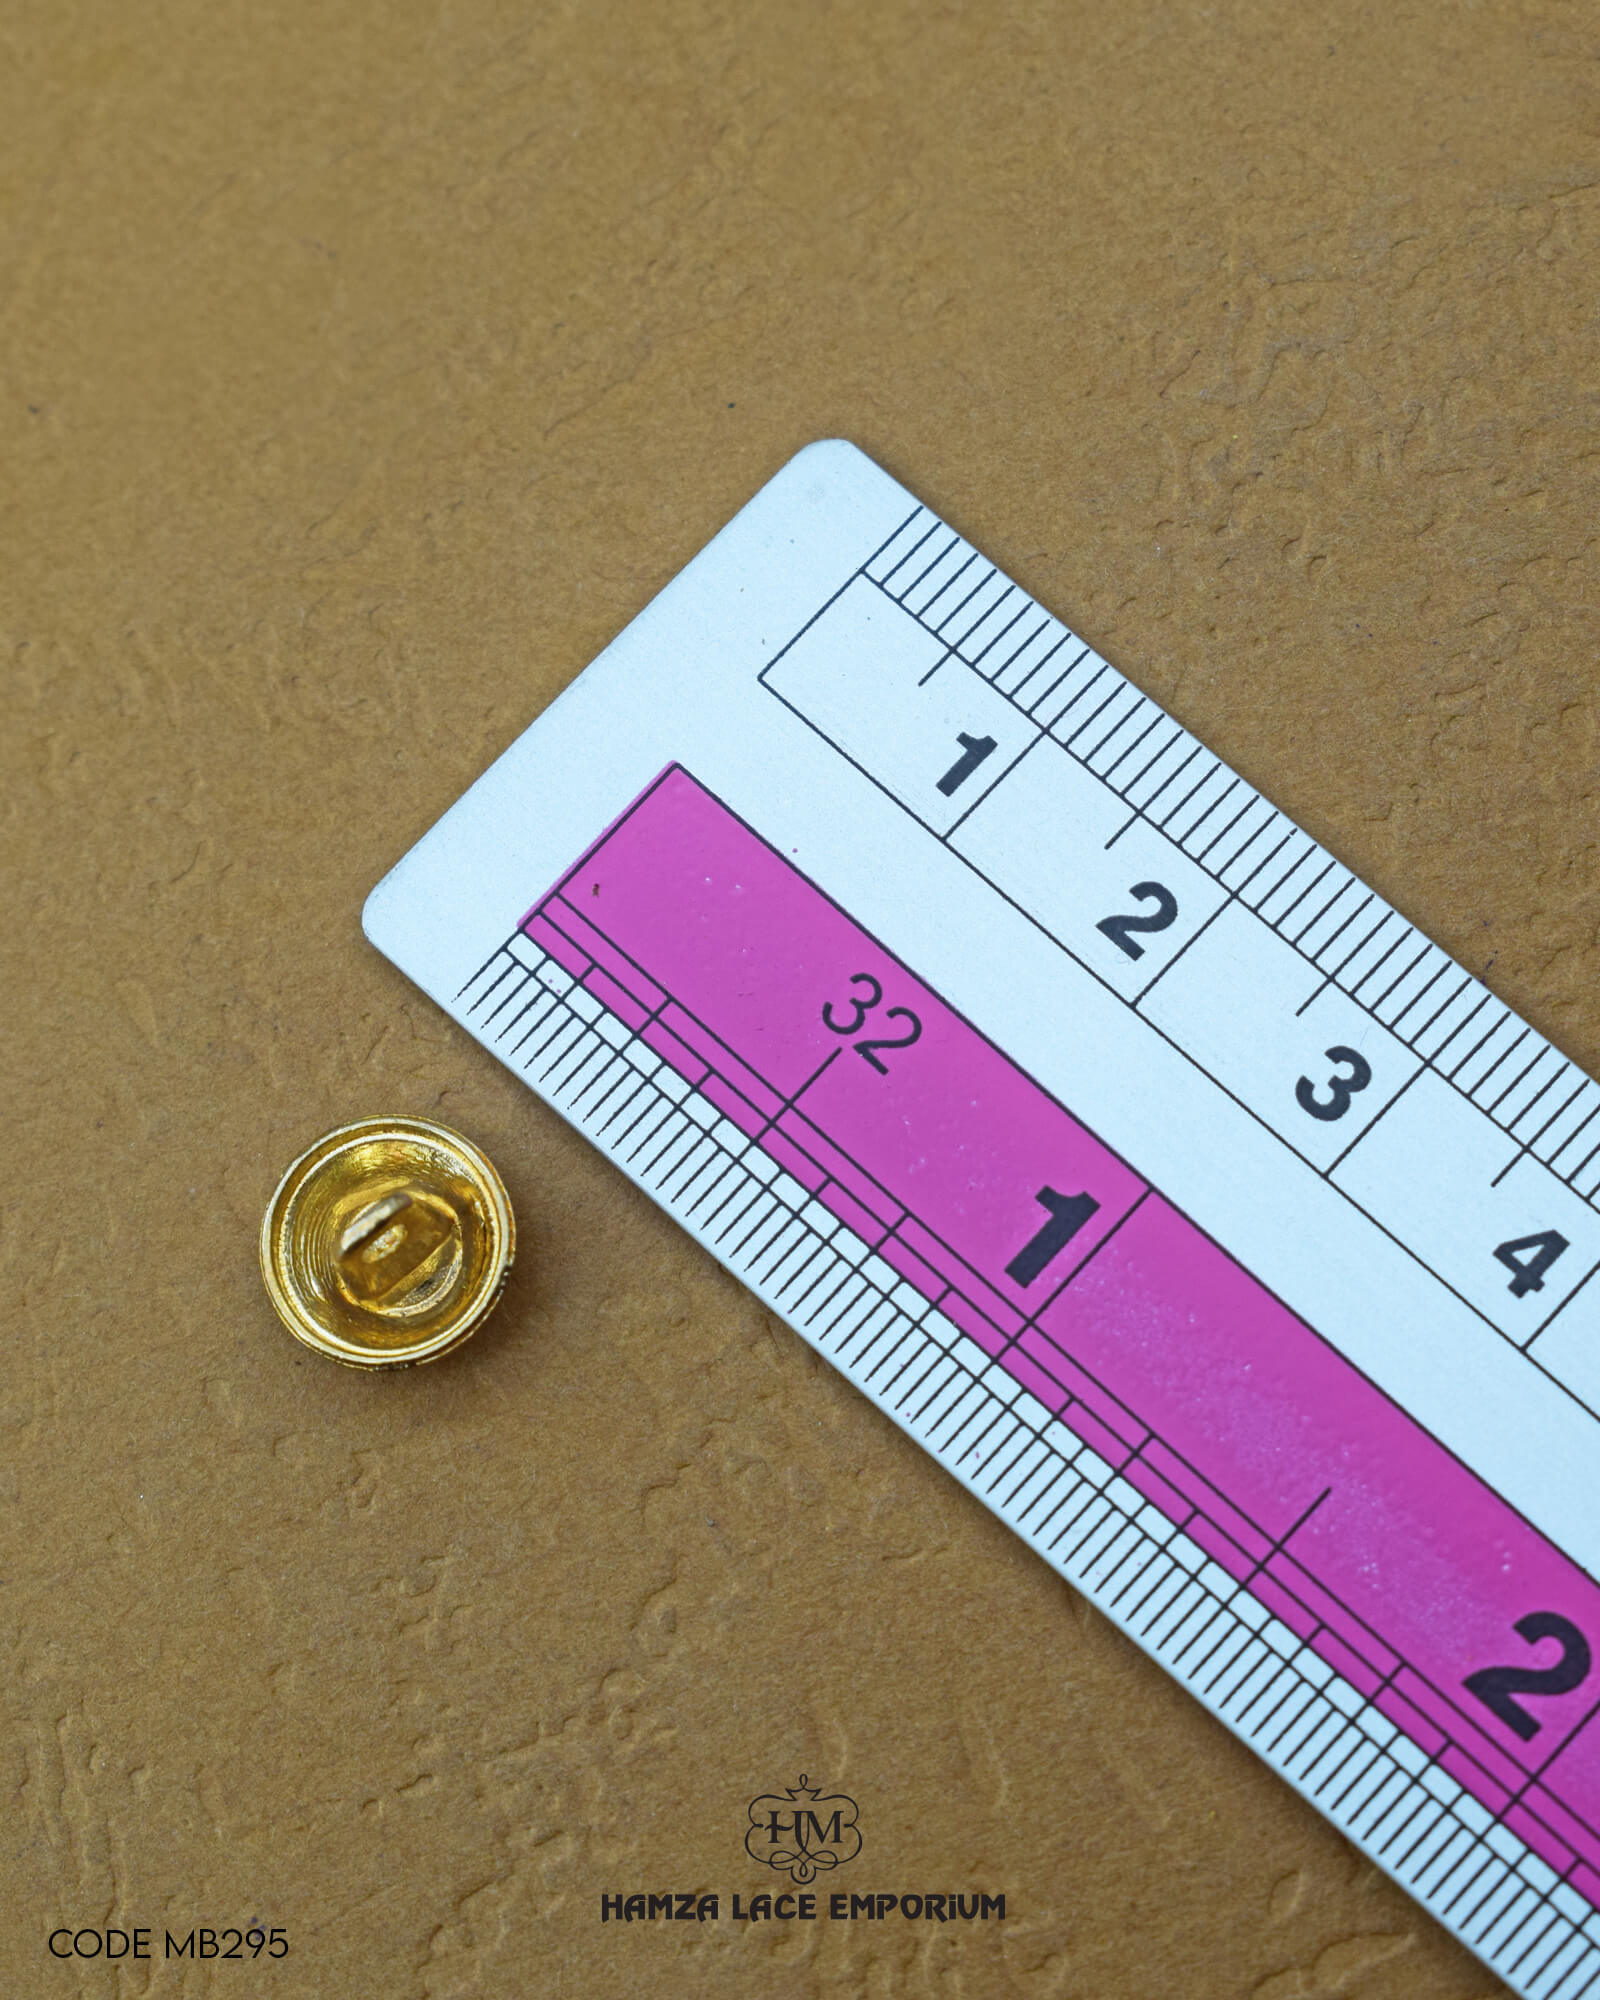 The size of the 'Golden Metal Button MB295' is measured by using a ruler